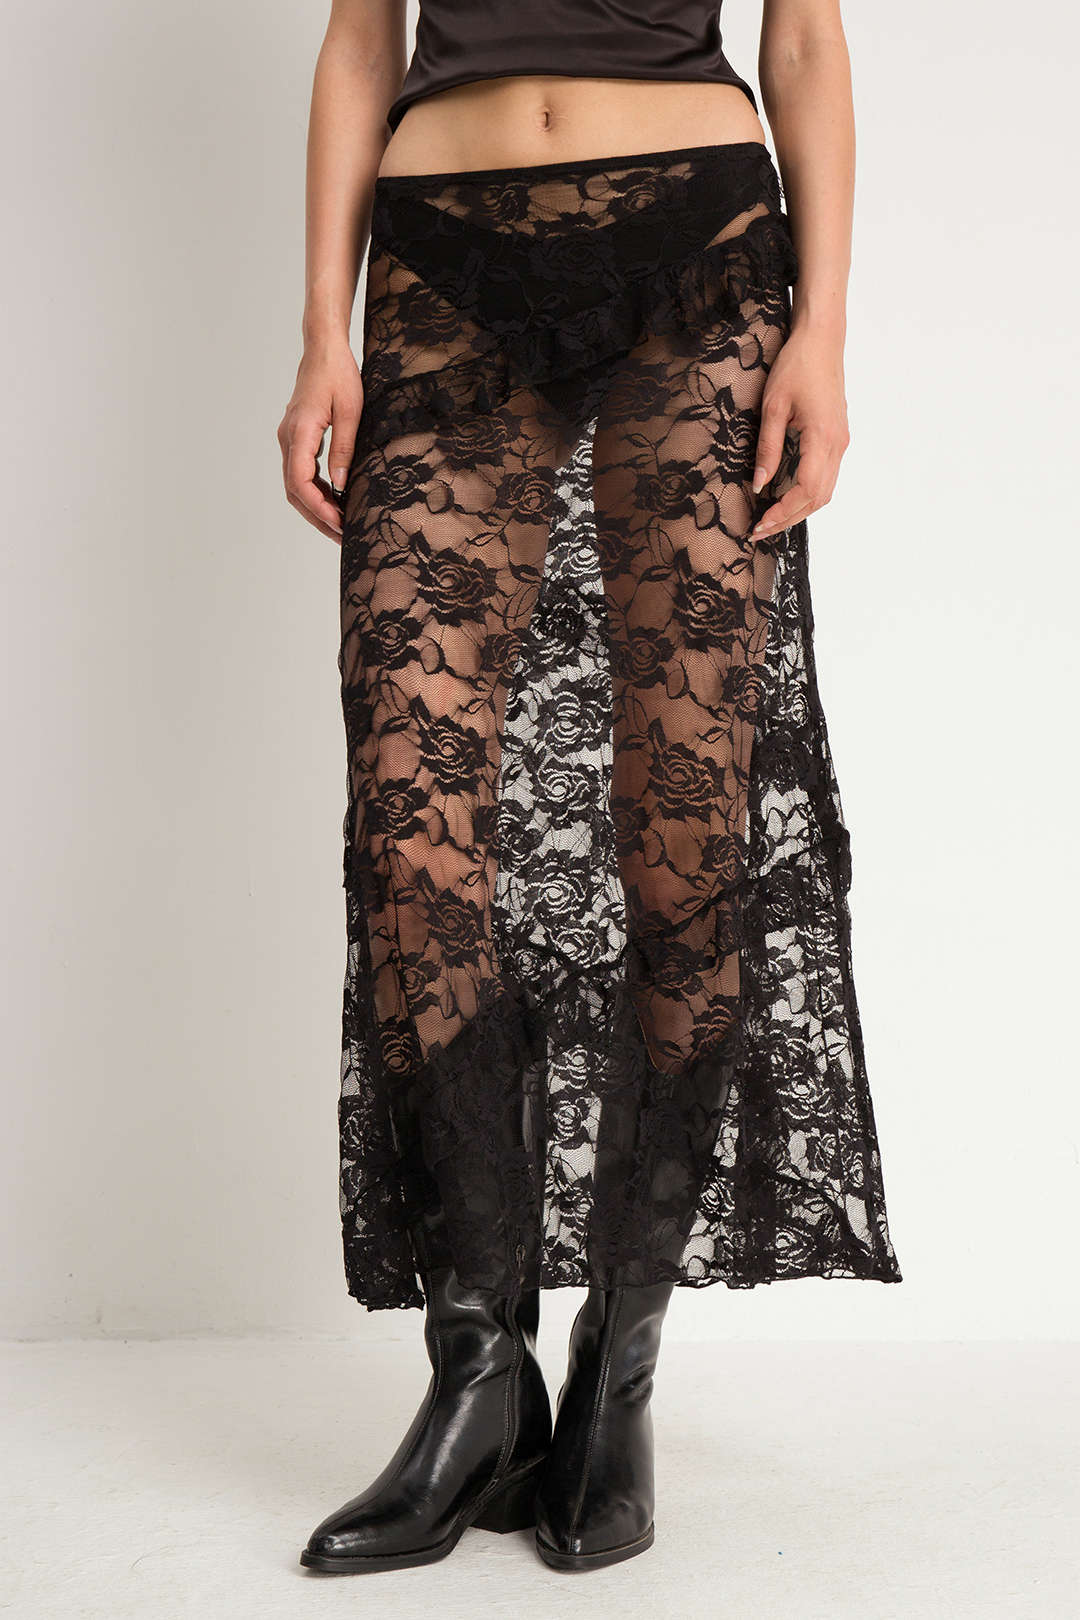 Floral Lace Sheer Frill Detail Maxi Skirt